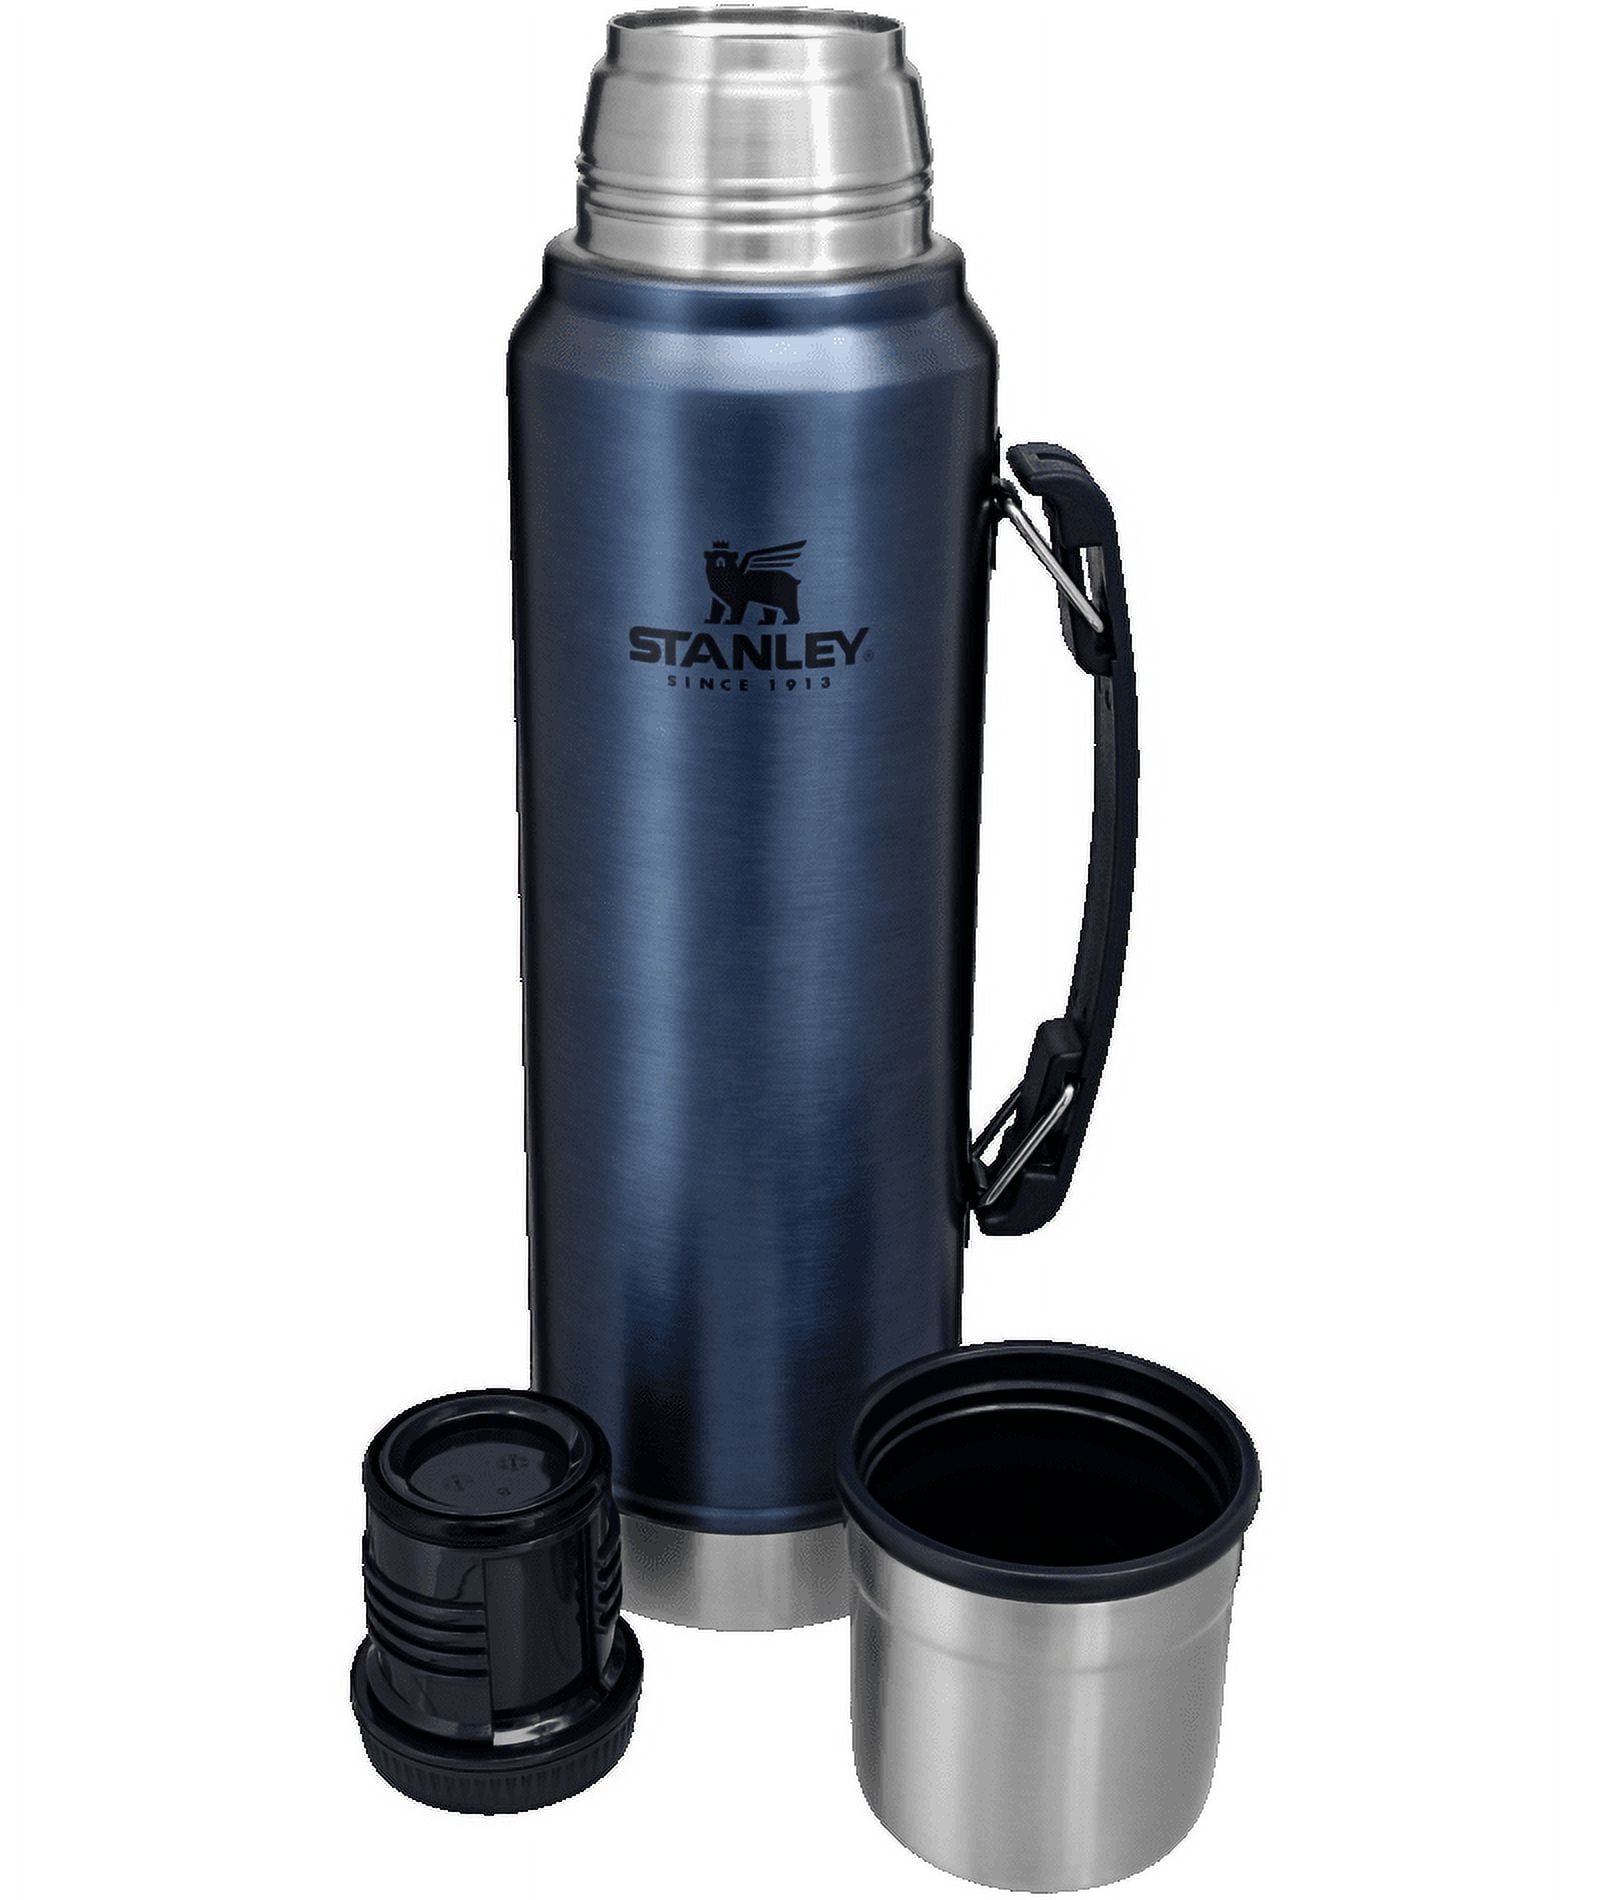 STANLEY Coffee Thermos Hot Liquid EN12546-1 Stainless Steel 1.1 qt